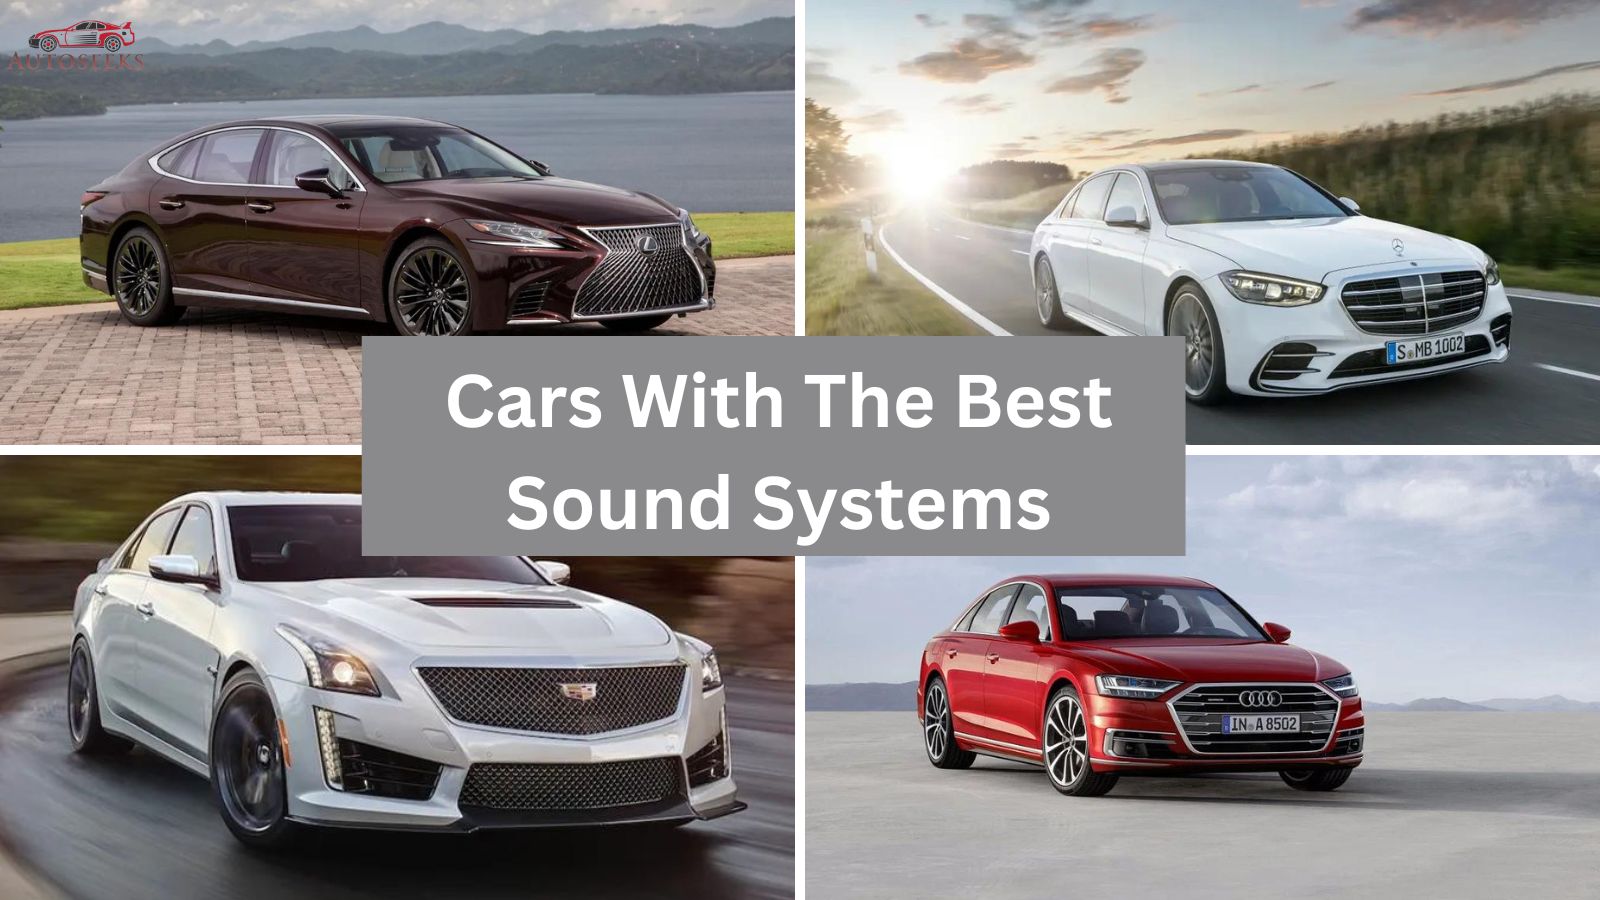 Top 5 Cars With The Best Sound Systems Featuring Premium Audio Systems